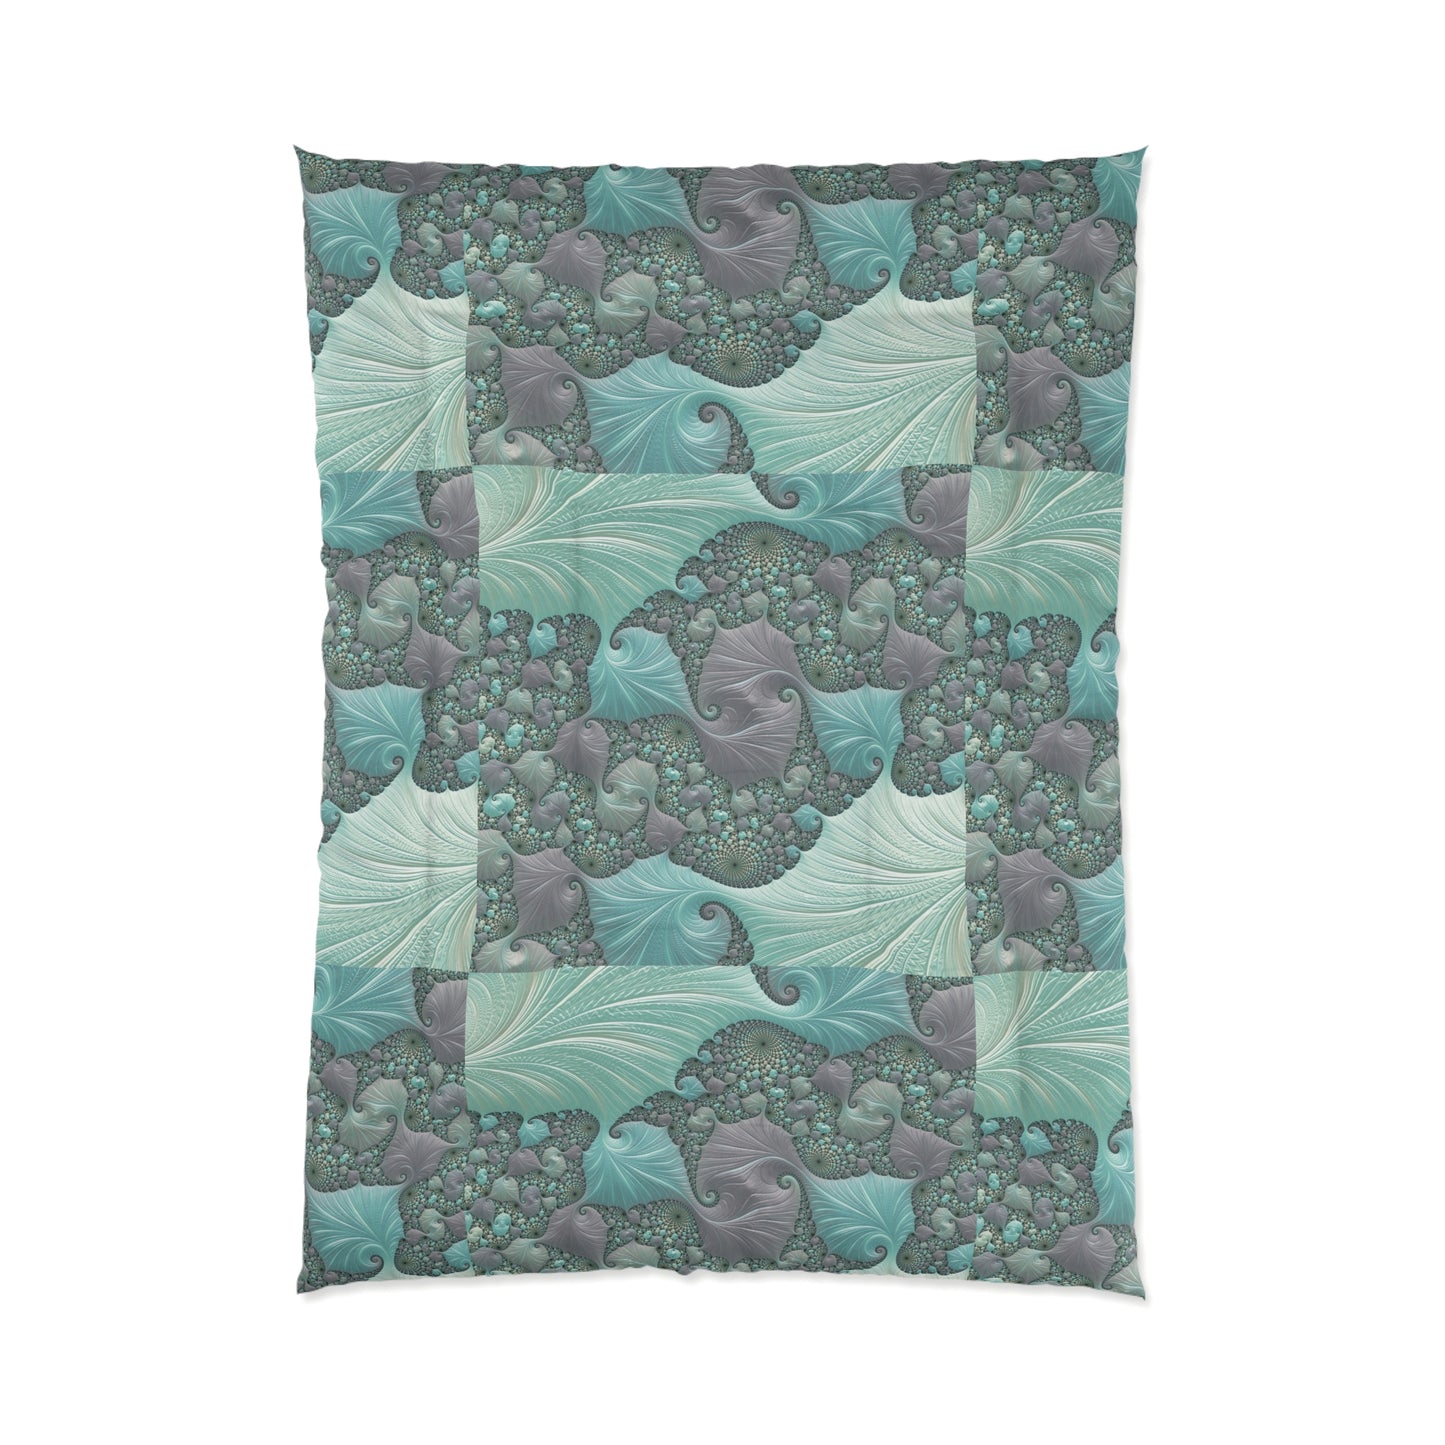 Green Leaves and River Stones Comforter